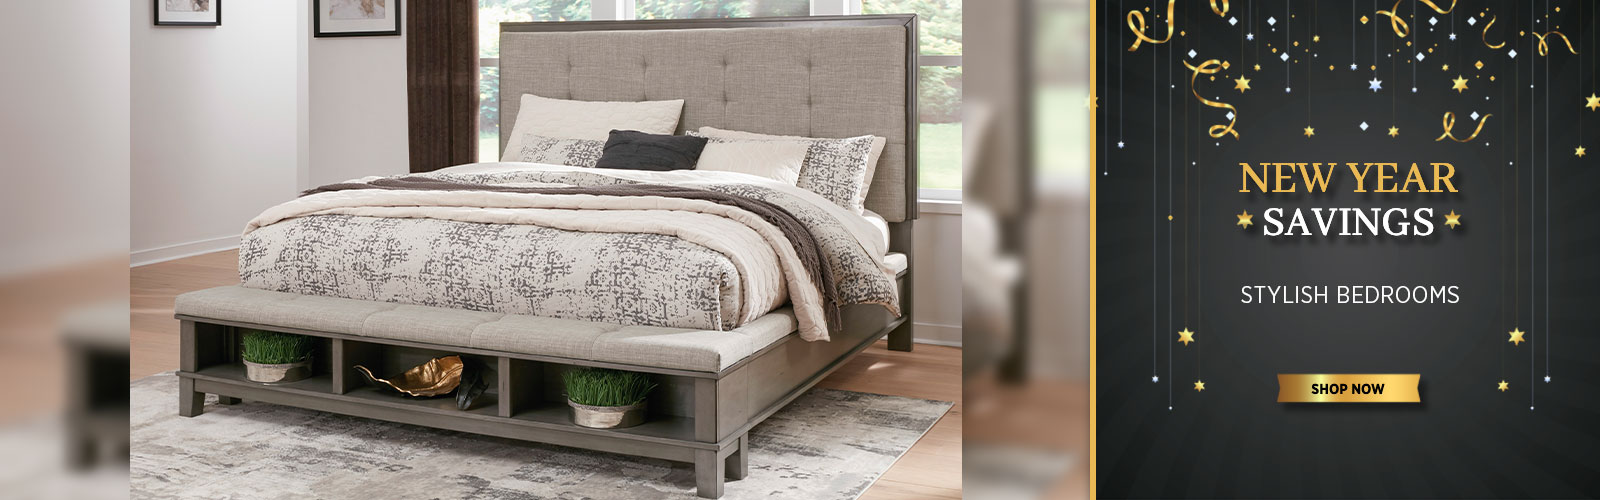 New Year's Sale - Stylish Bedrooms - Shop Now